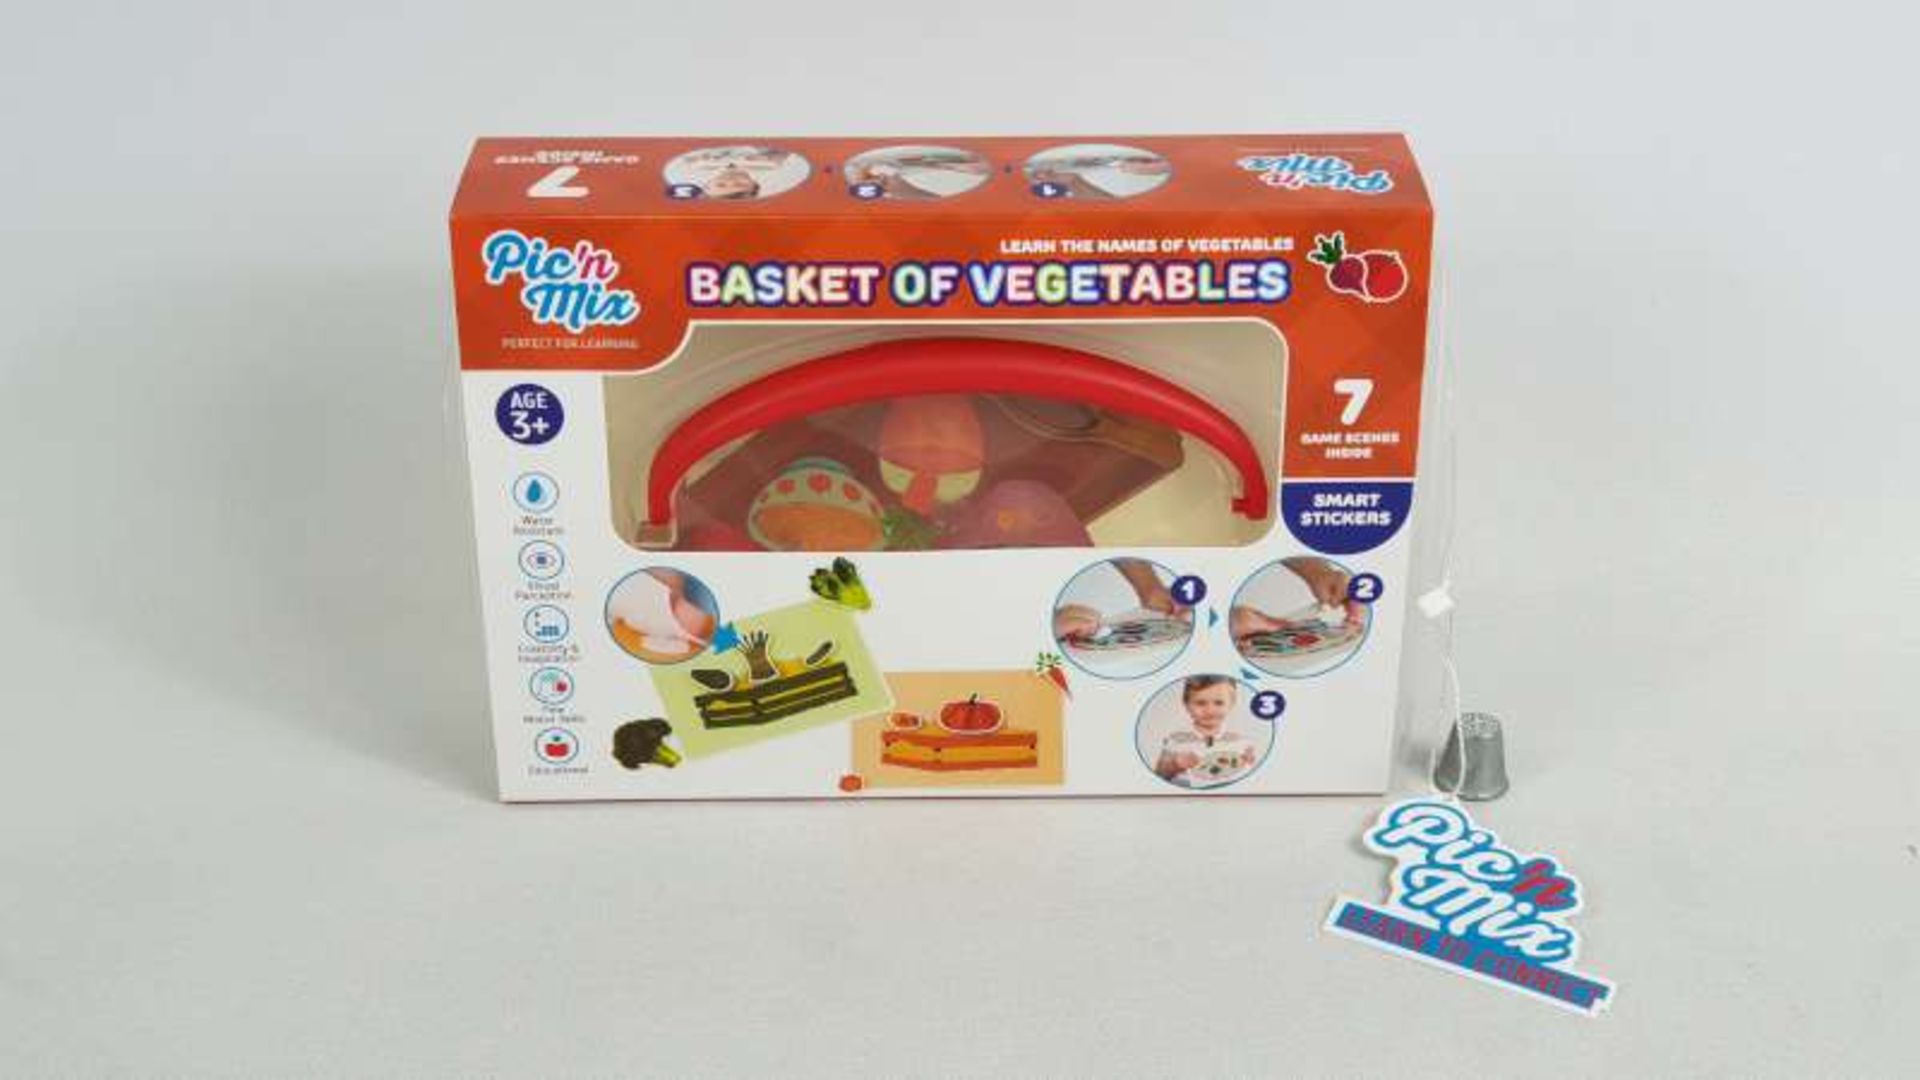 24 X BRAND NEW BOXED PIC N MIX BASKET OF VEGETABLES EDUCATIONAL LEARNING GAMES IN 1 BOX